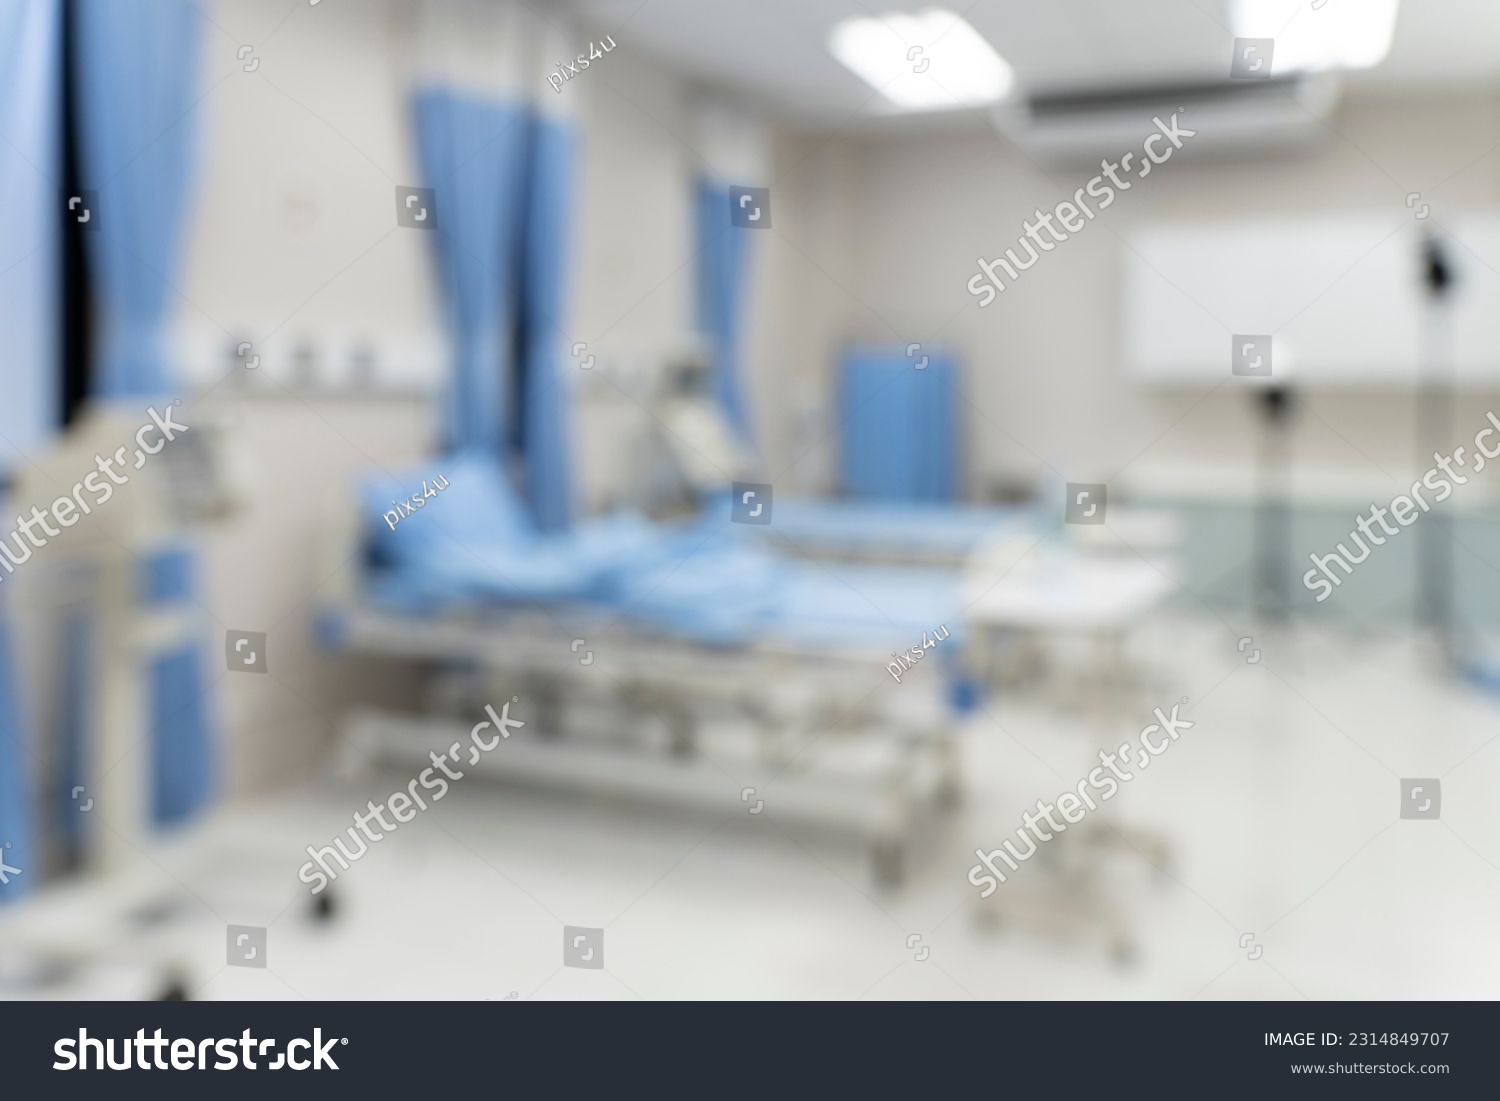 Blurred image background with Empty emergency room, intensive care room, intensive care unit, medical beds with equipment in hospital or clinic #2314849707